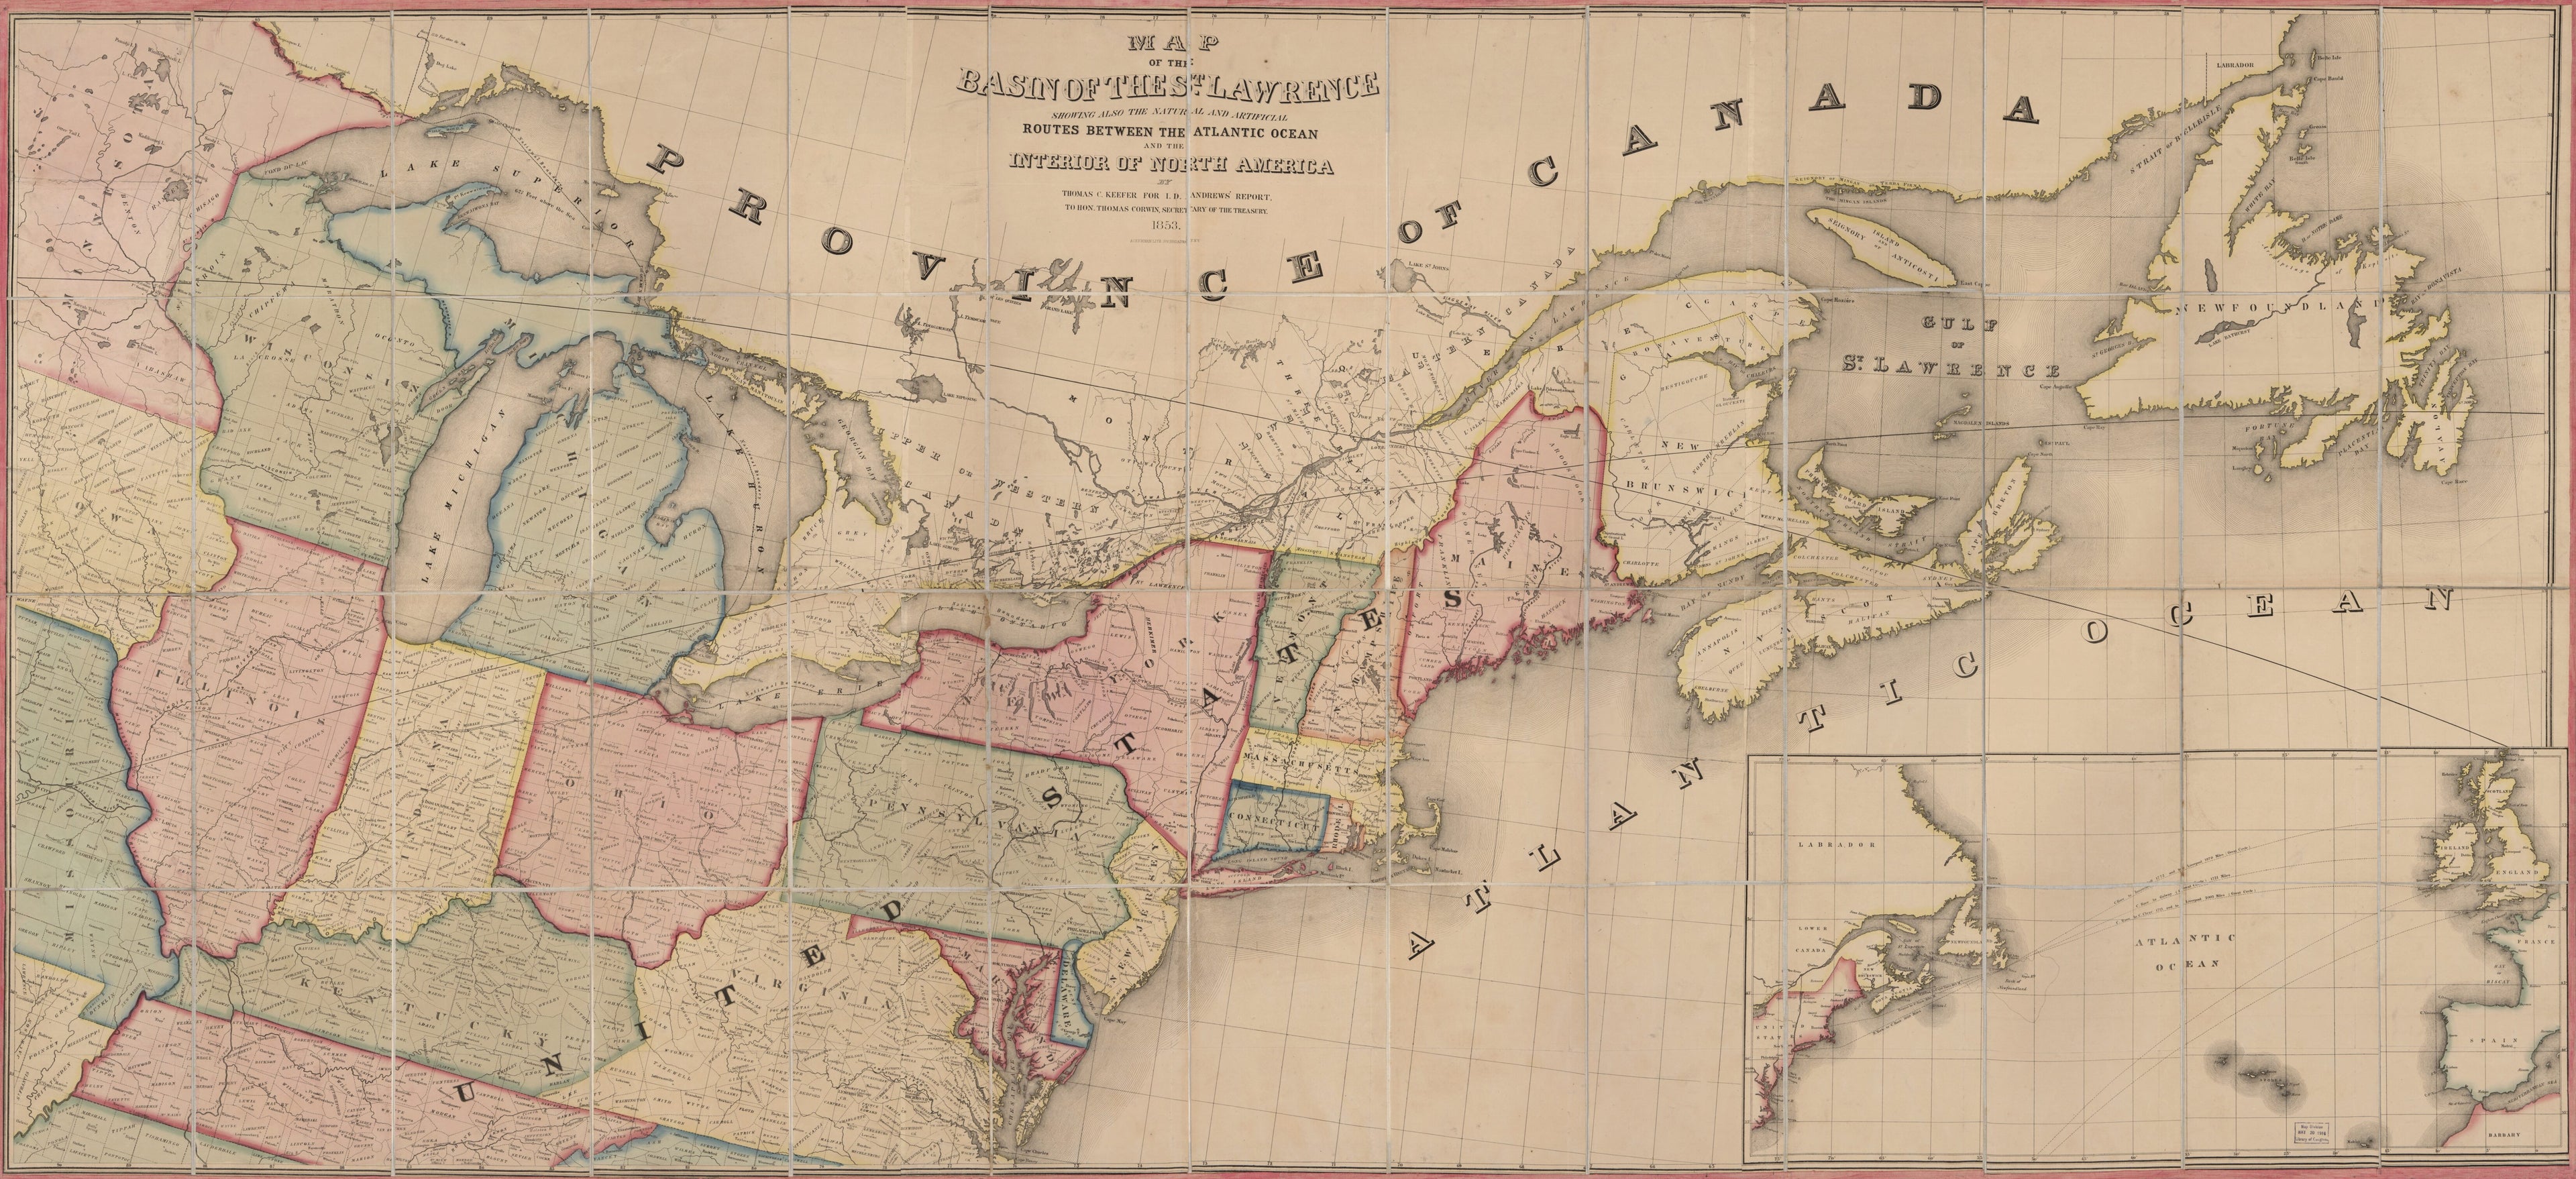 This old map of Map of the Basin of the St. Lawrence : Showing Also the Natural and Artificial Routes Between the Atlantic Ocean and the Interior of North America from 1853 was created by  Ackerman Lithr, Israel D. (Israel Dewolf) Andrews, Thomas C. Keef